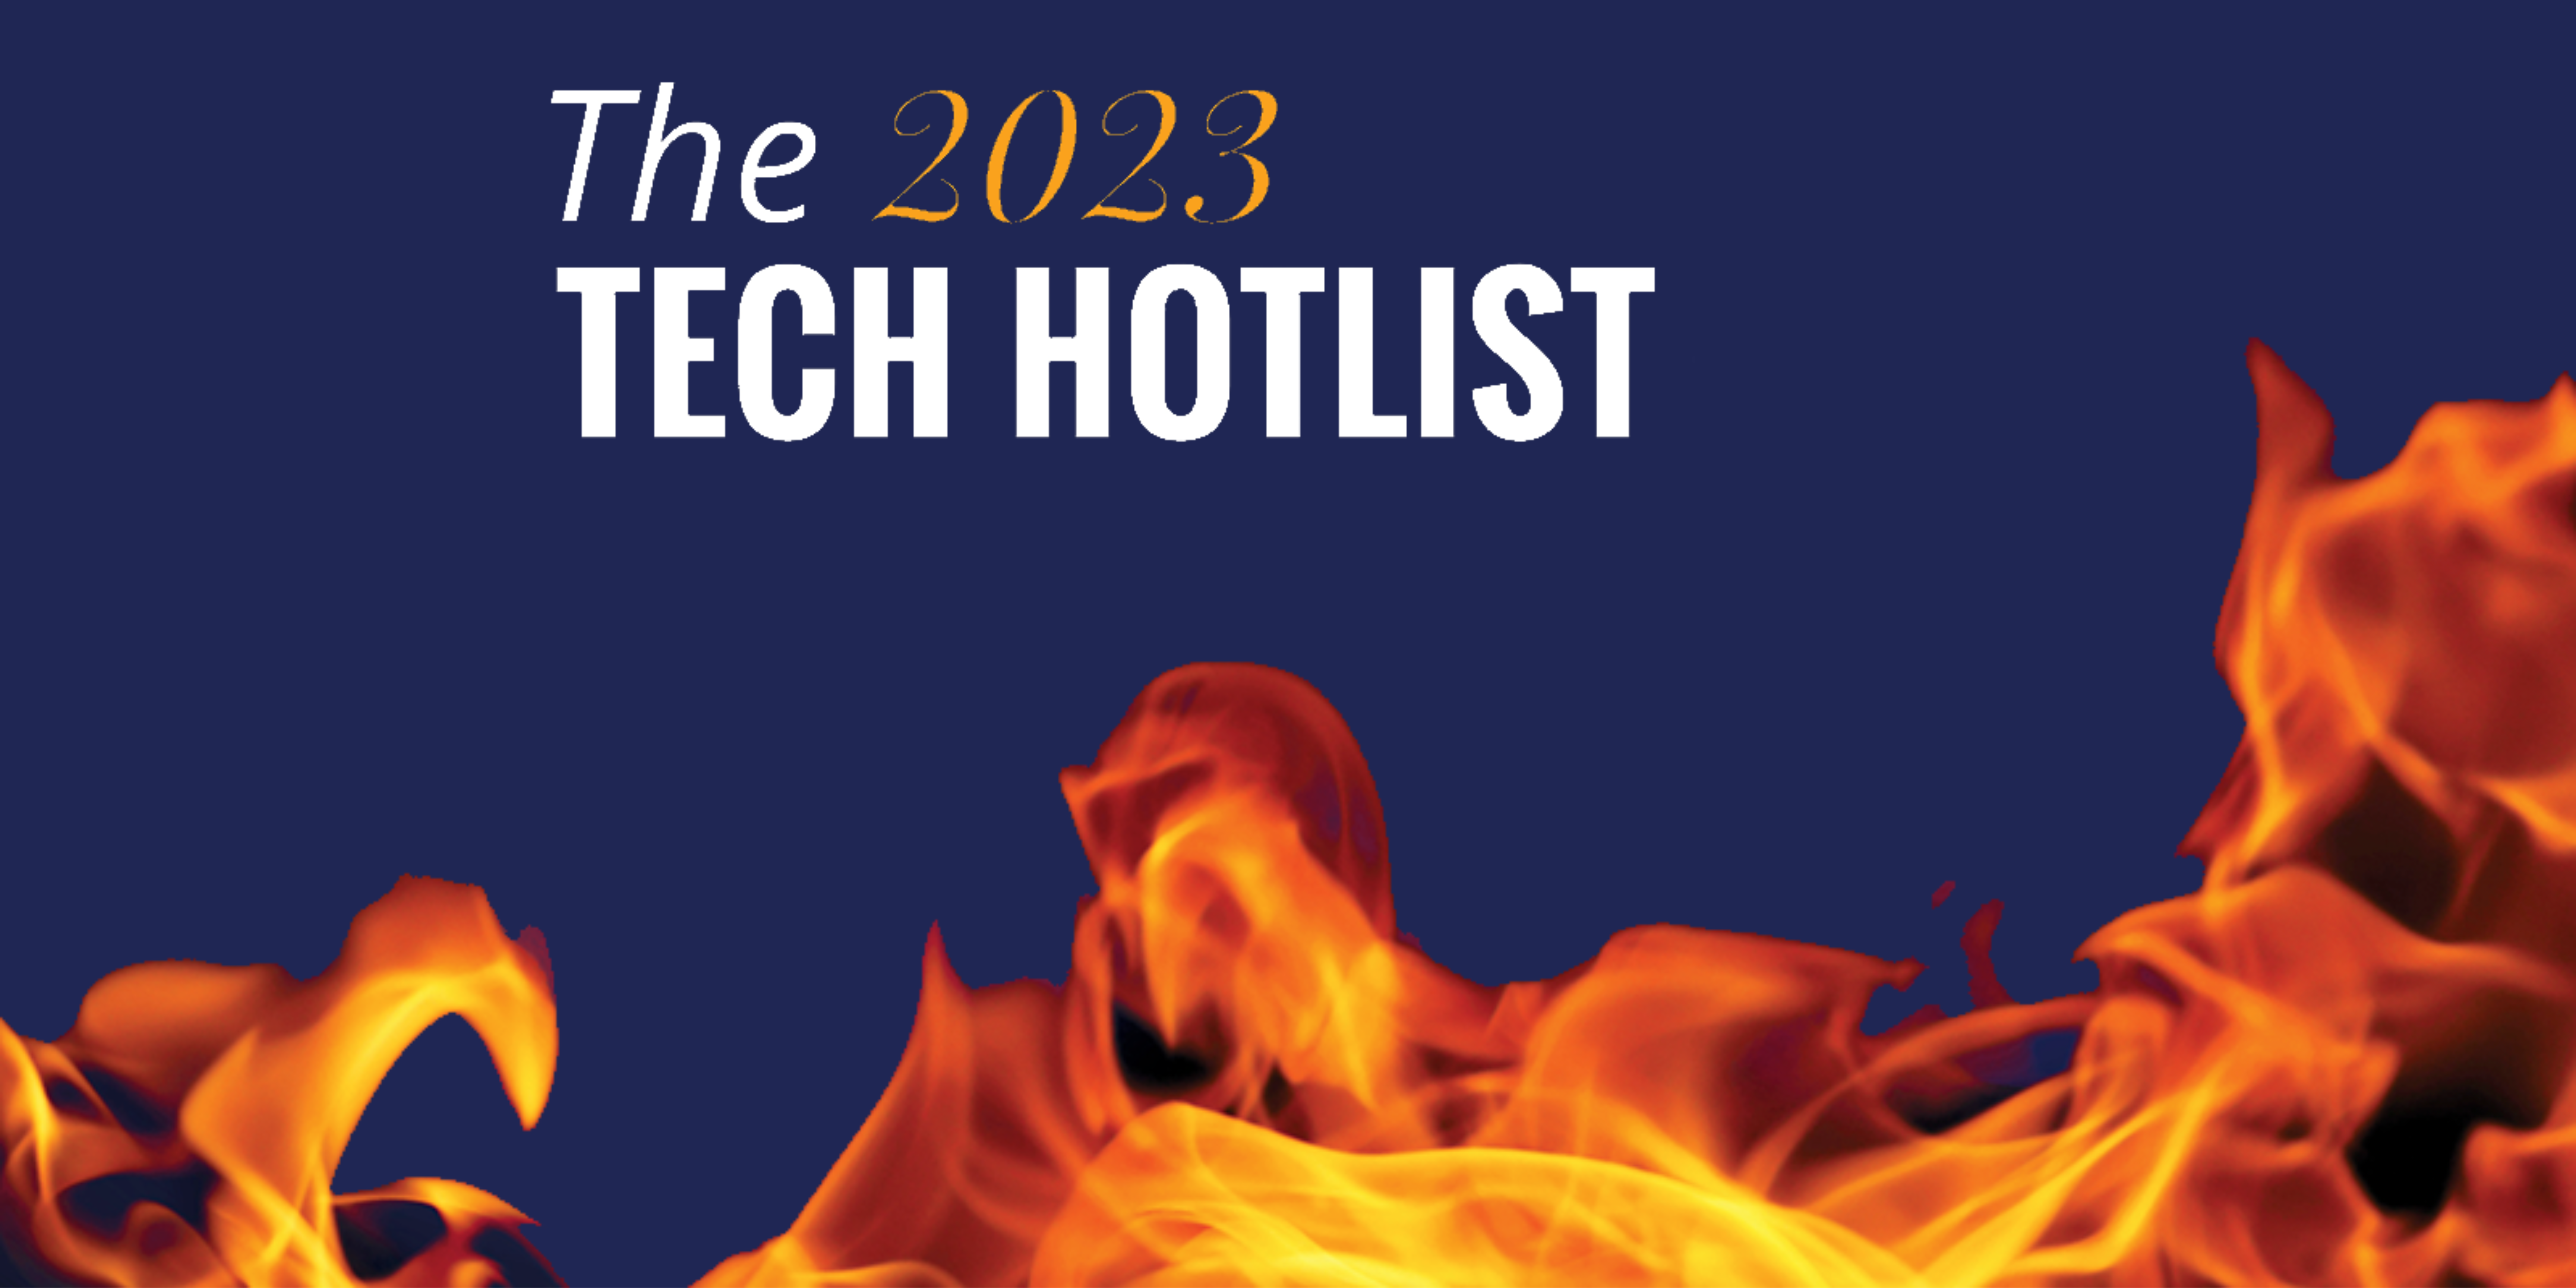 Mobility iQ Named in Tech Hotlist Awards 2023